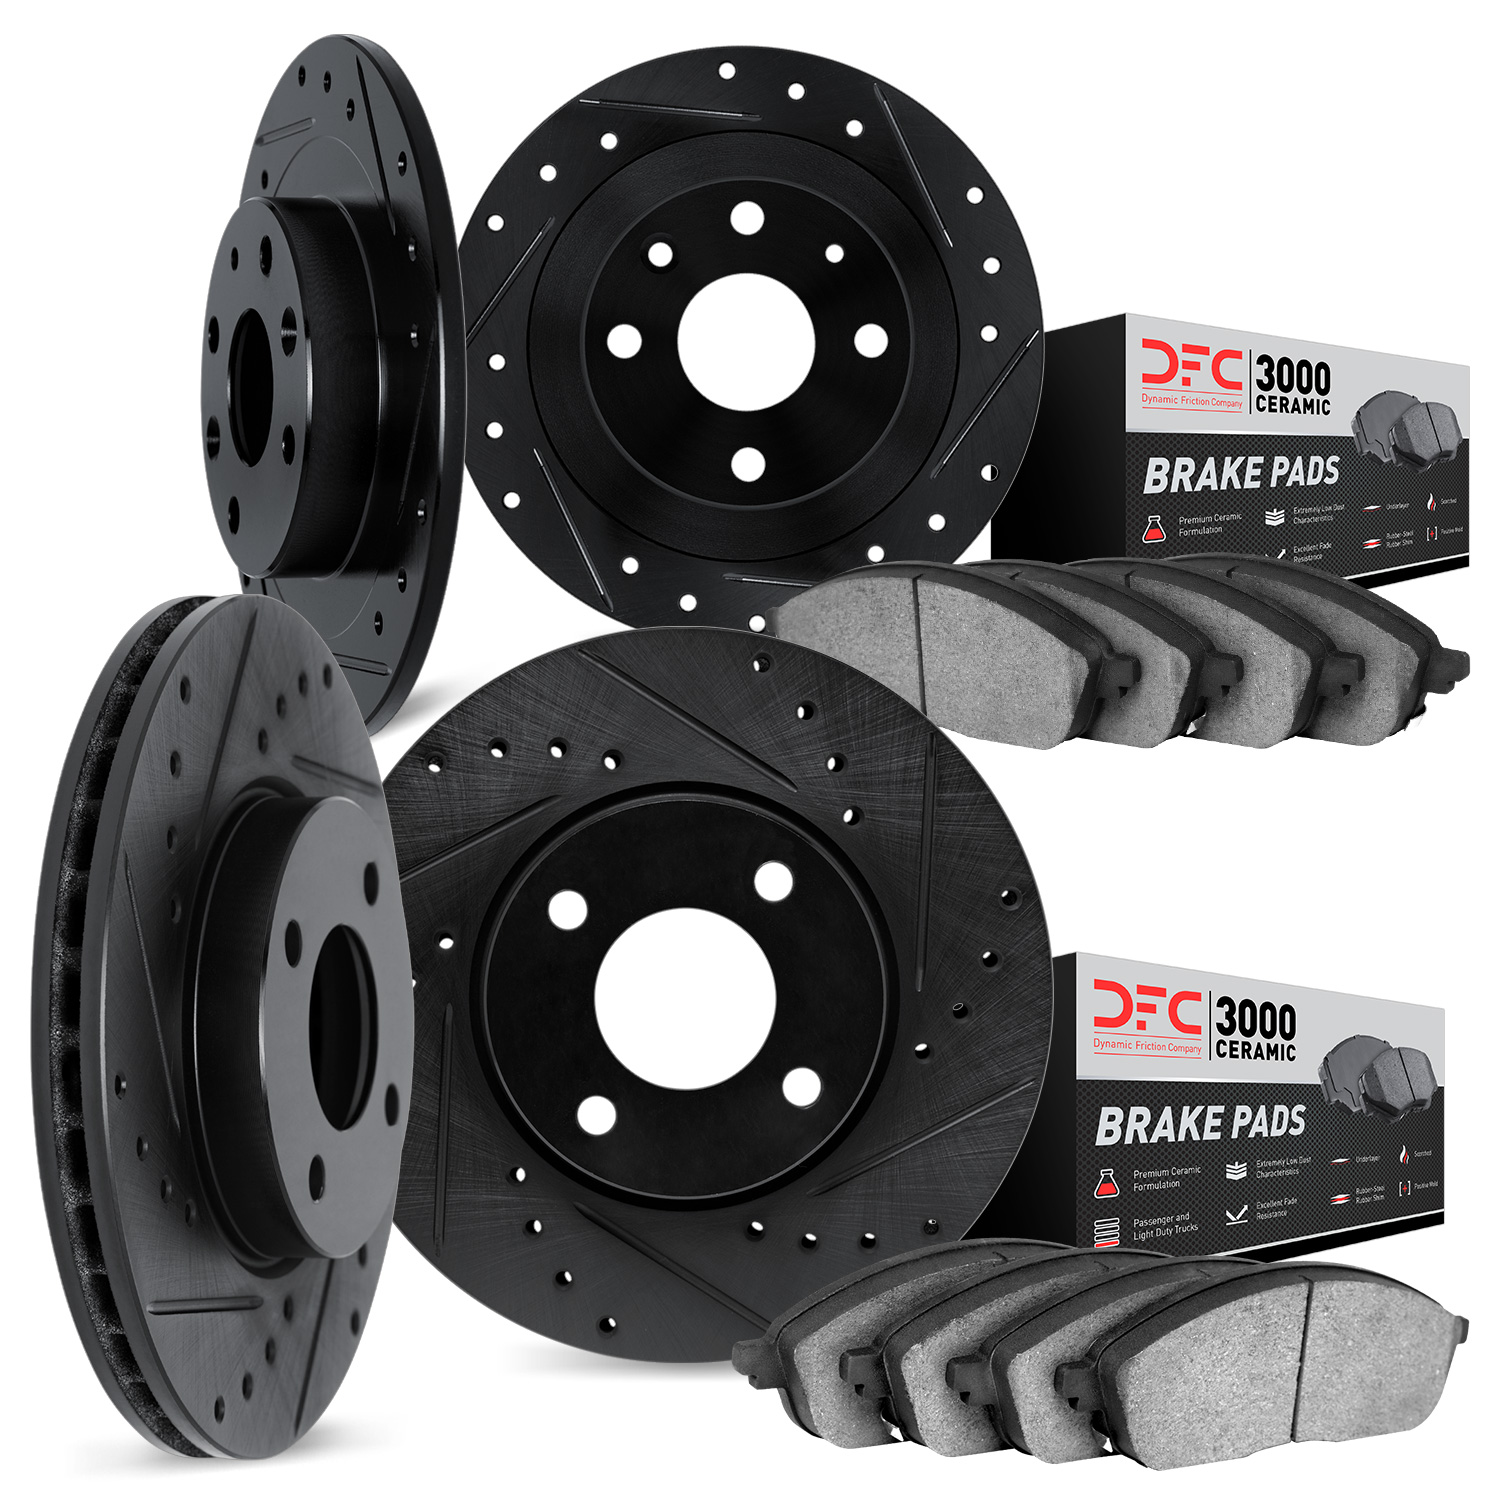 8304-58003 Drilled/Slotted Brake Rotors with 3000-Series Ceramic Brake Pads Kit [Black], 1987-1990 Acura/Honda, Position: Front